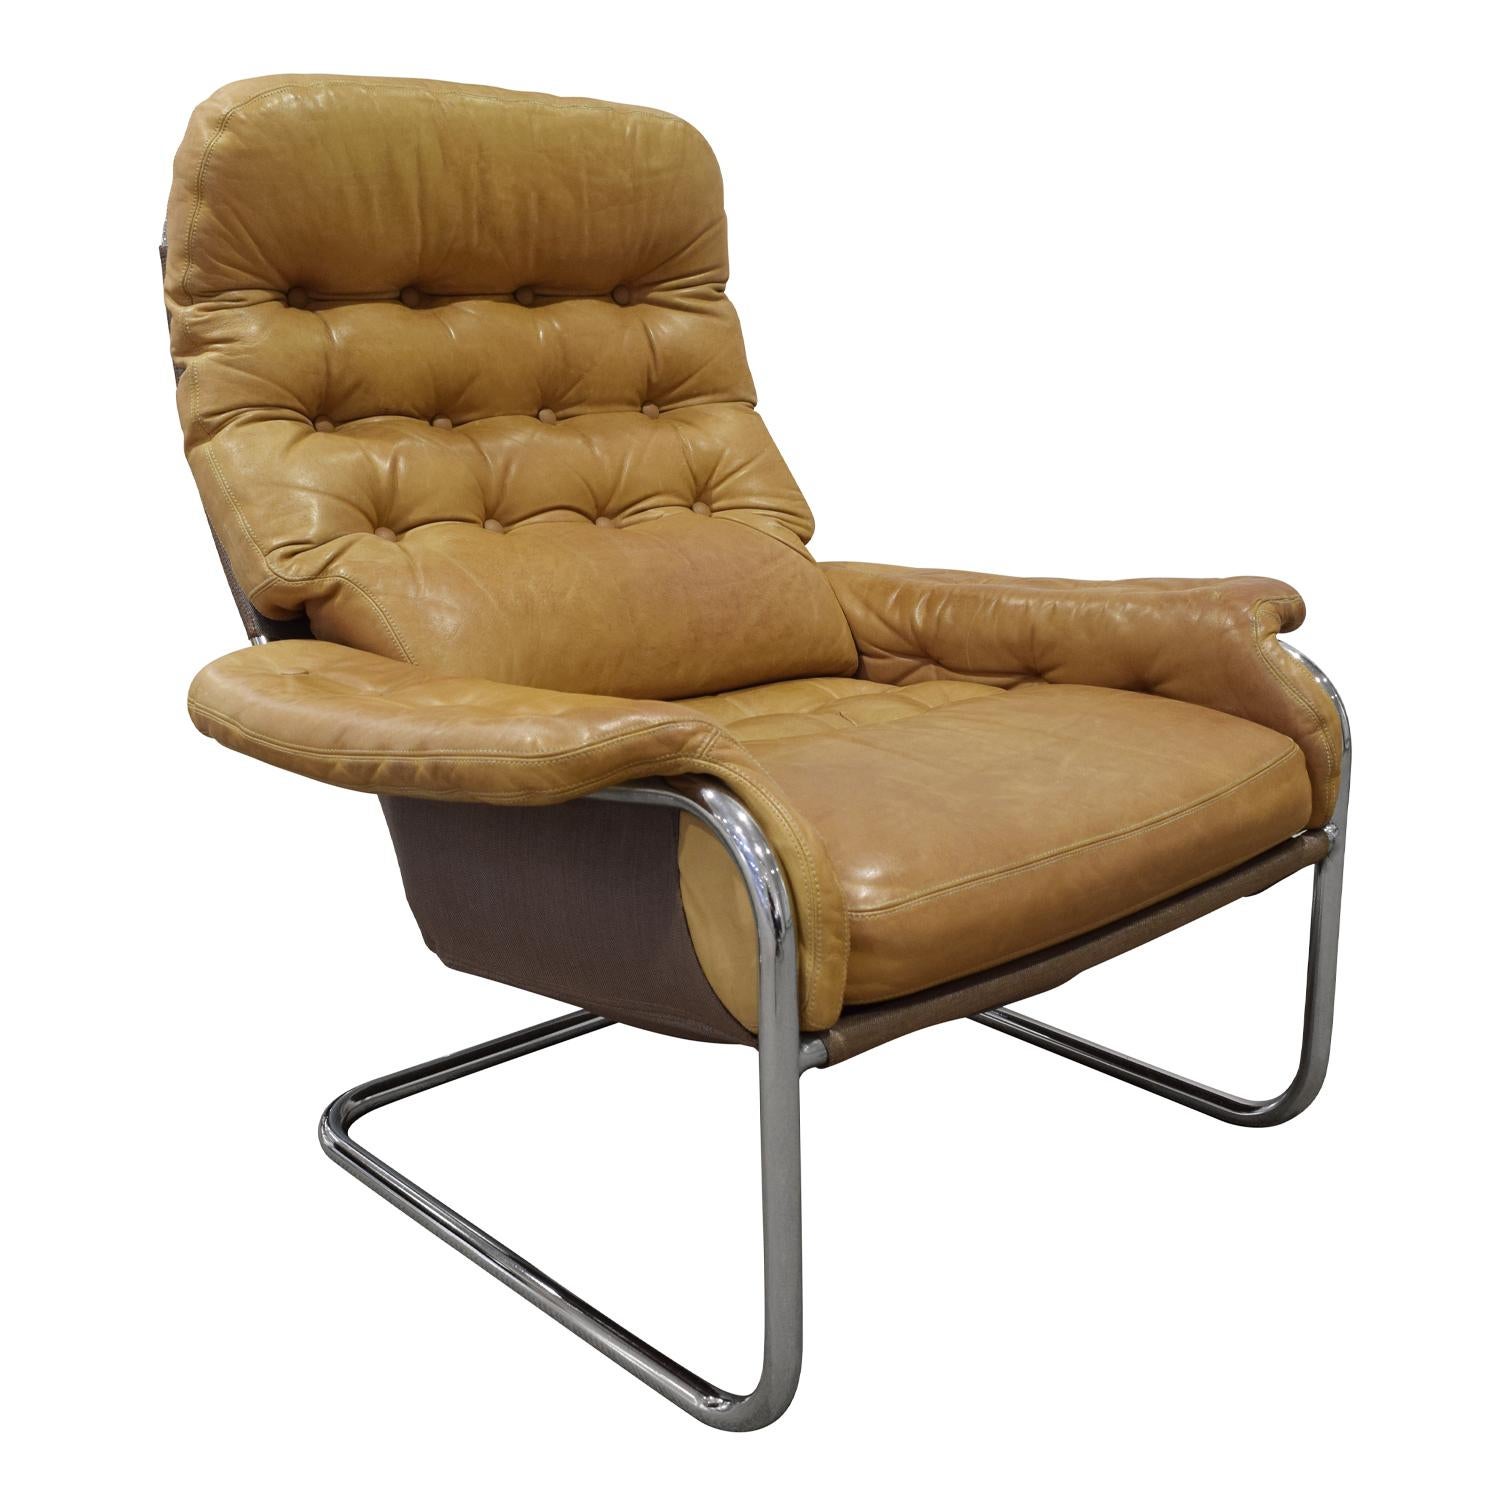 Swedish DUX Chair and Ottoman in Polished Chrome and Leather Upholstery, 1980s